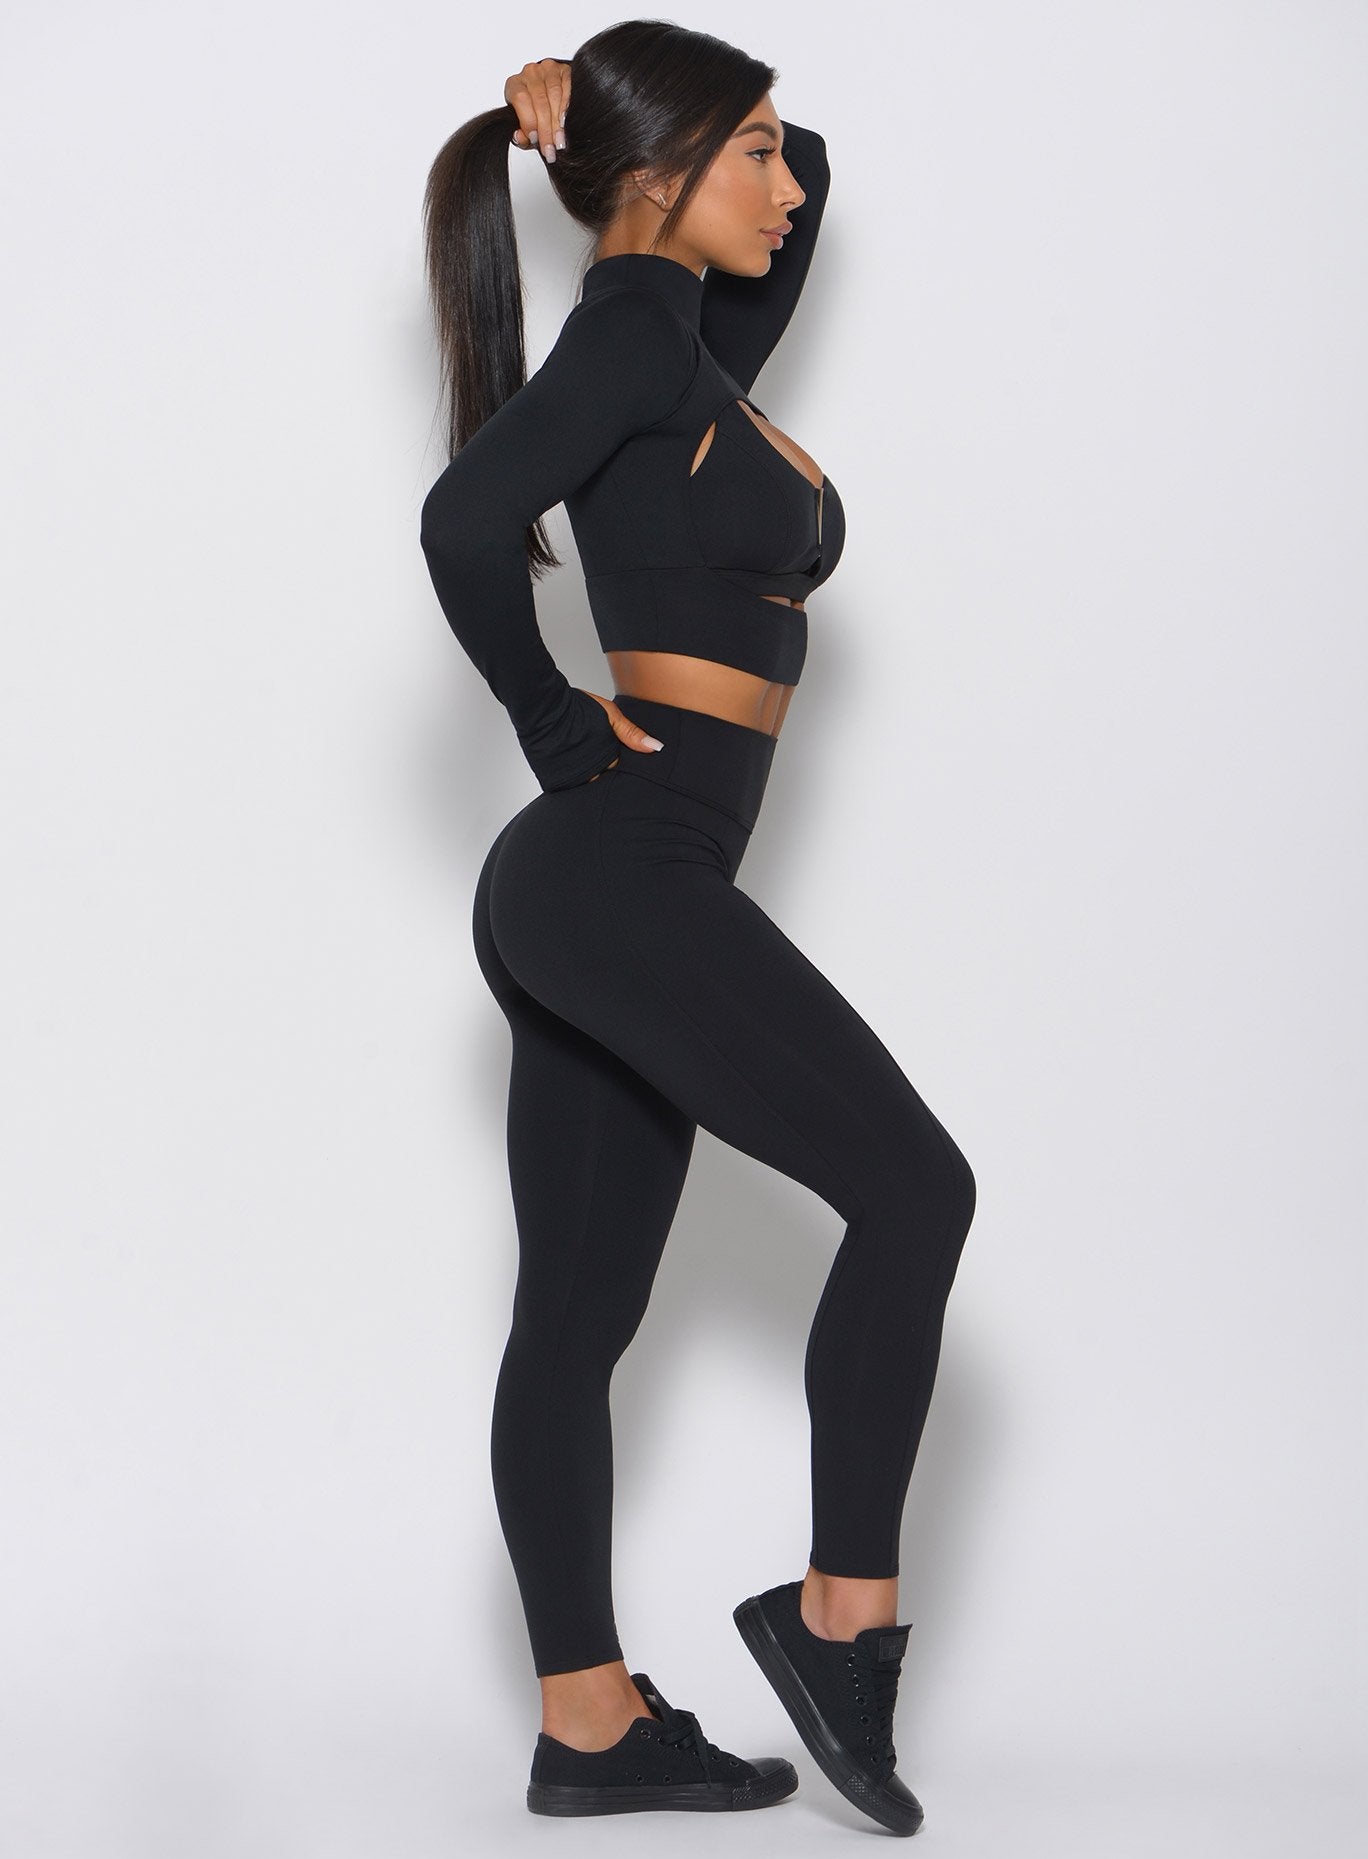 Left side view of the model in a high waist black leggings with a V back design